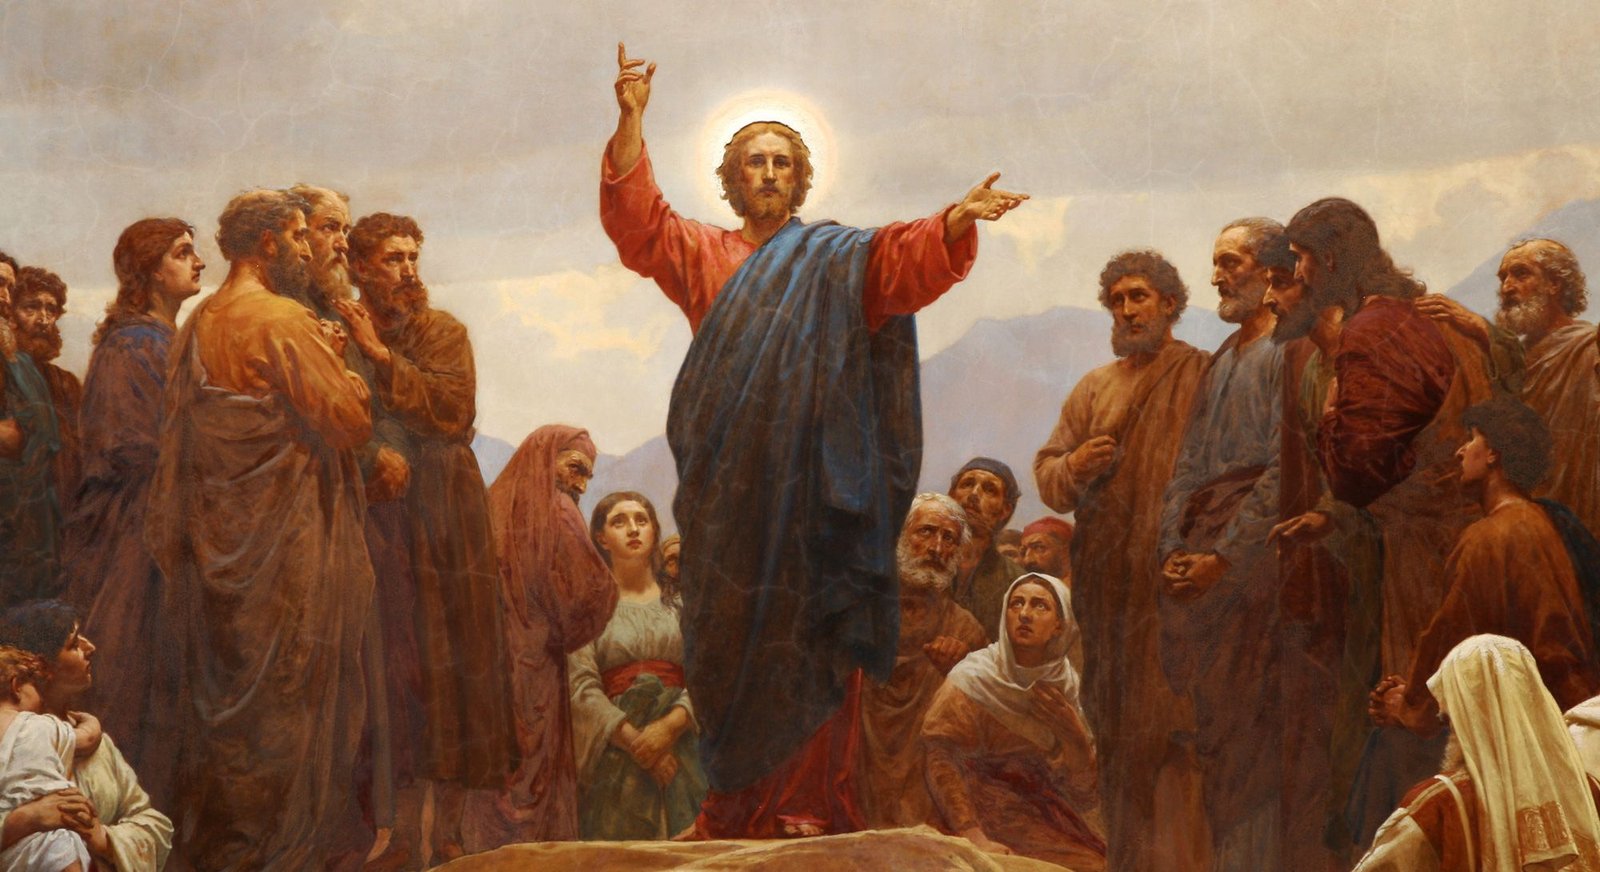 Today’s Gospel – Introduction to the Sermon on the Mount